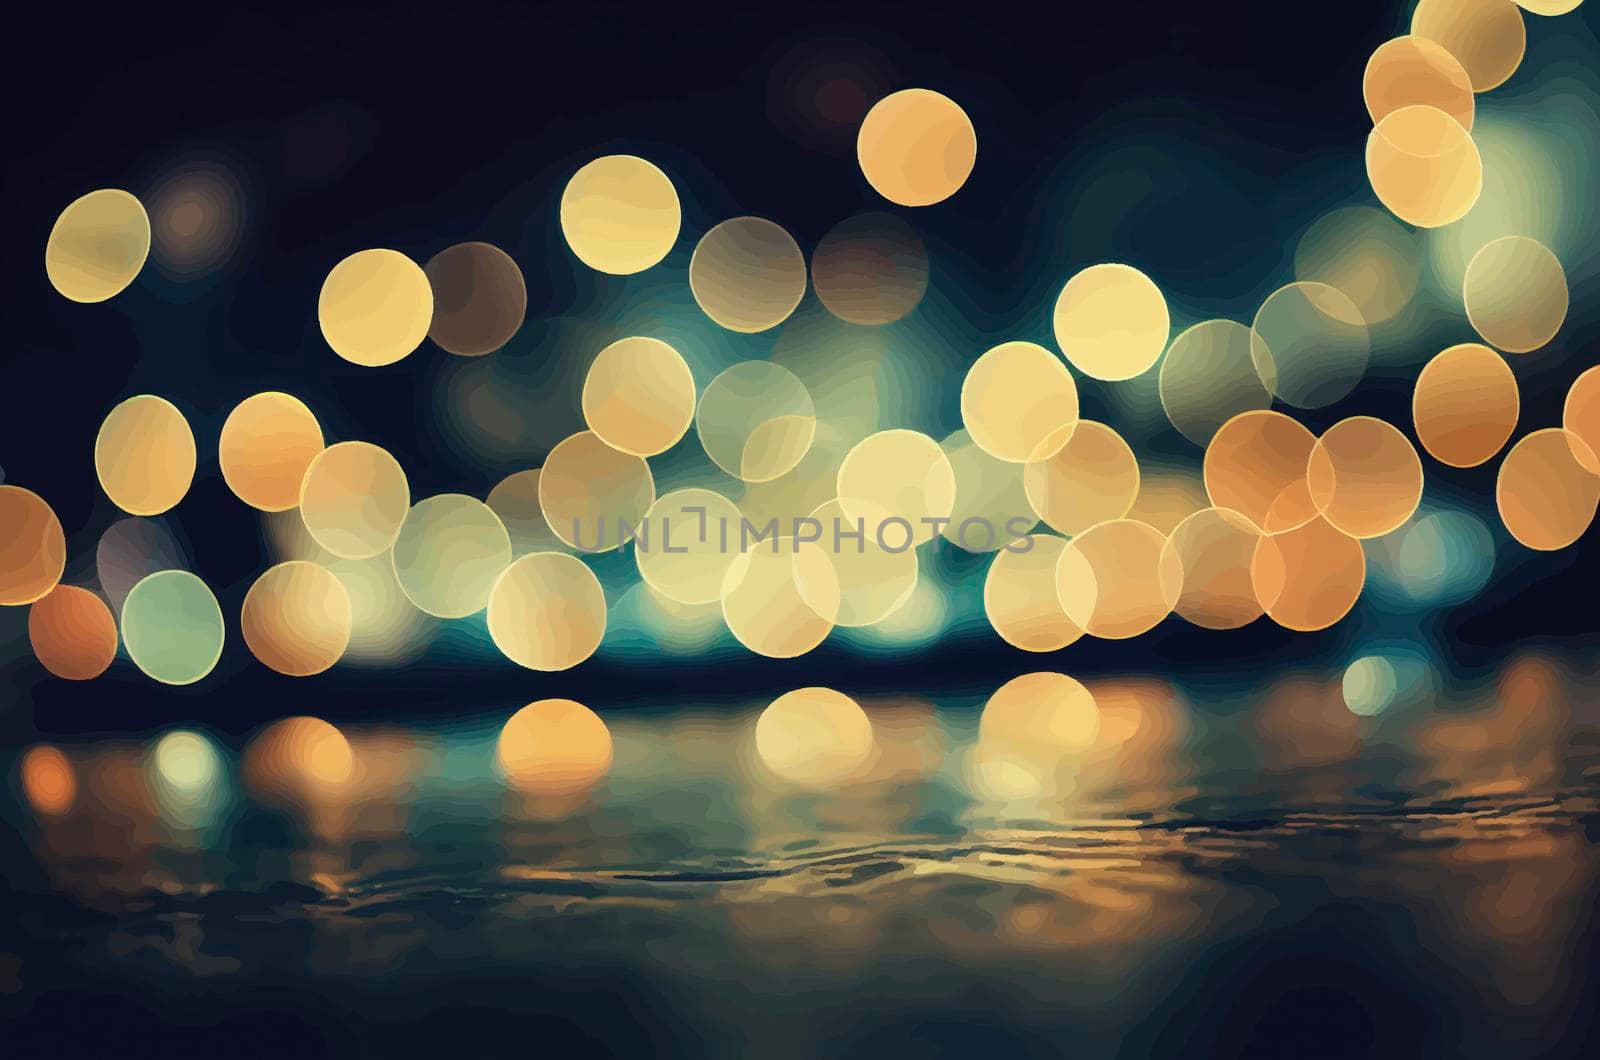 illustration of Bokeh and Large Colorful Circle Lights. Background of bright lights out of focus